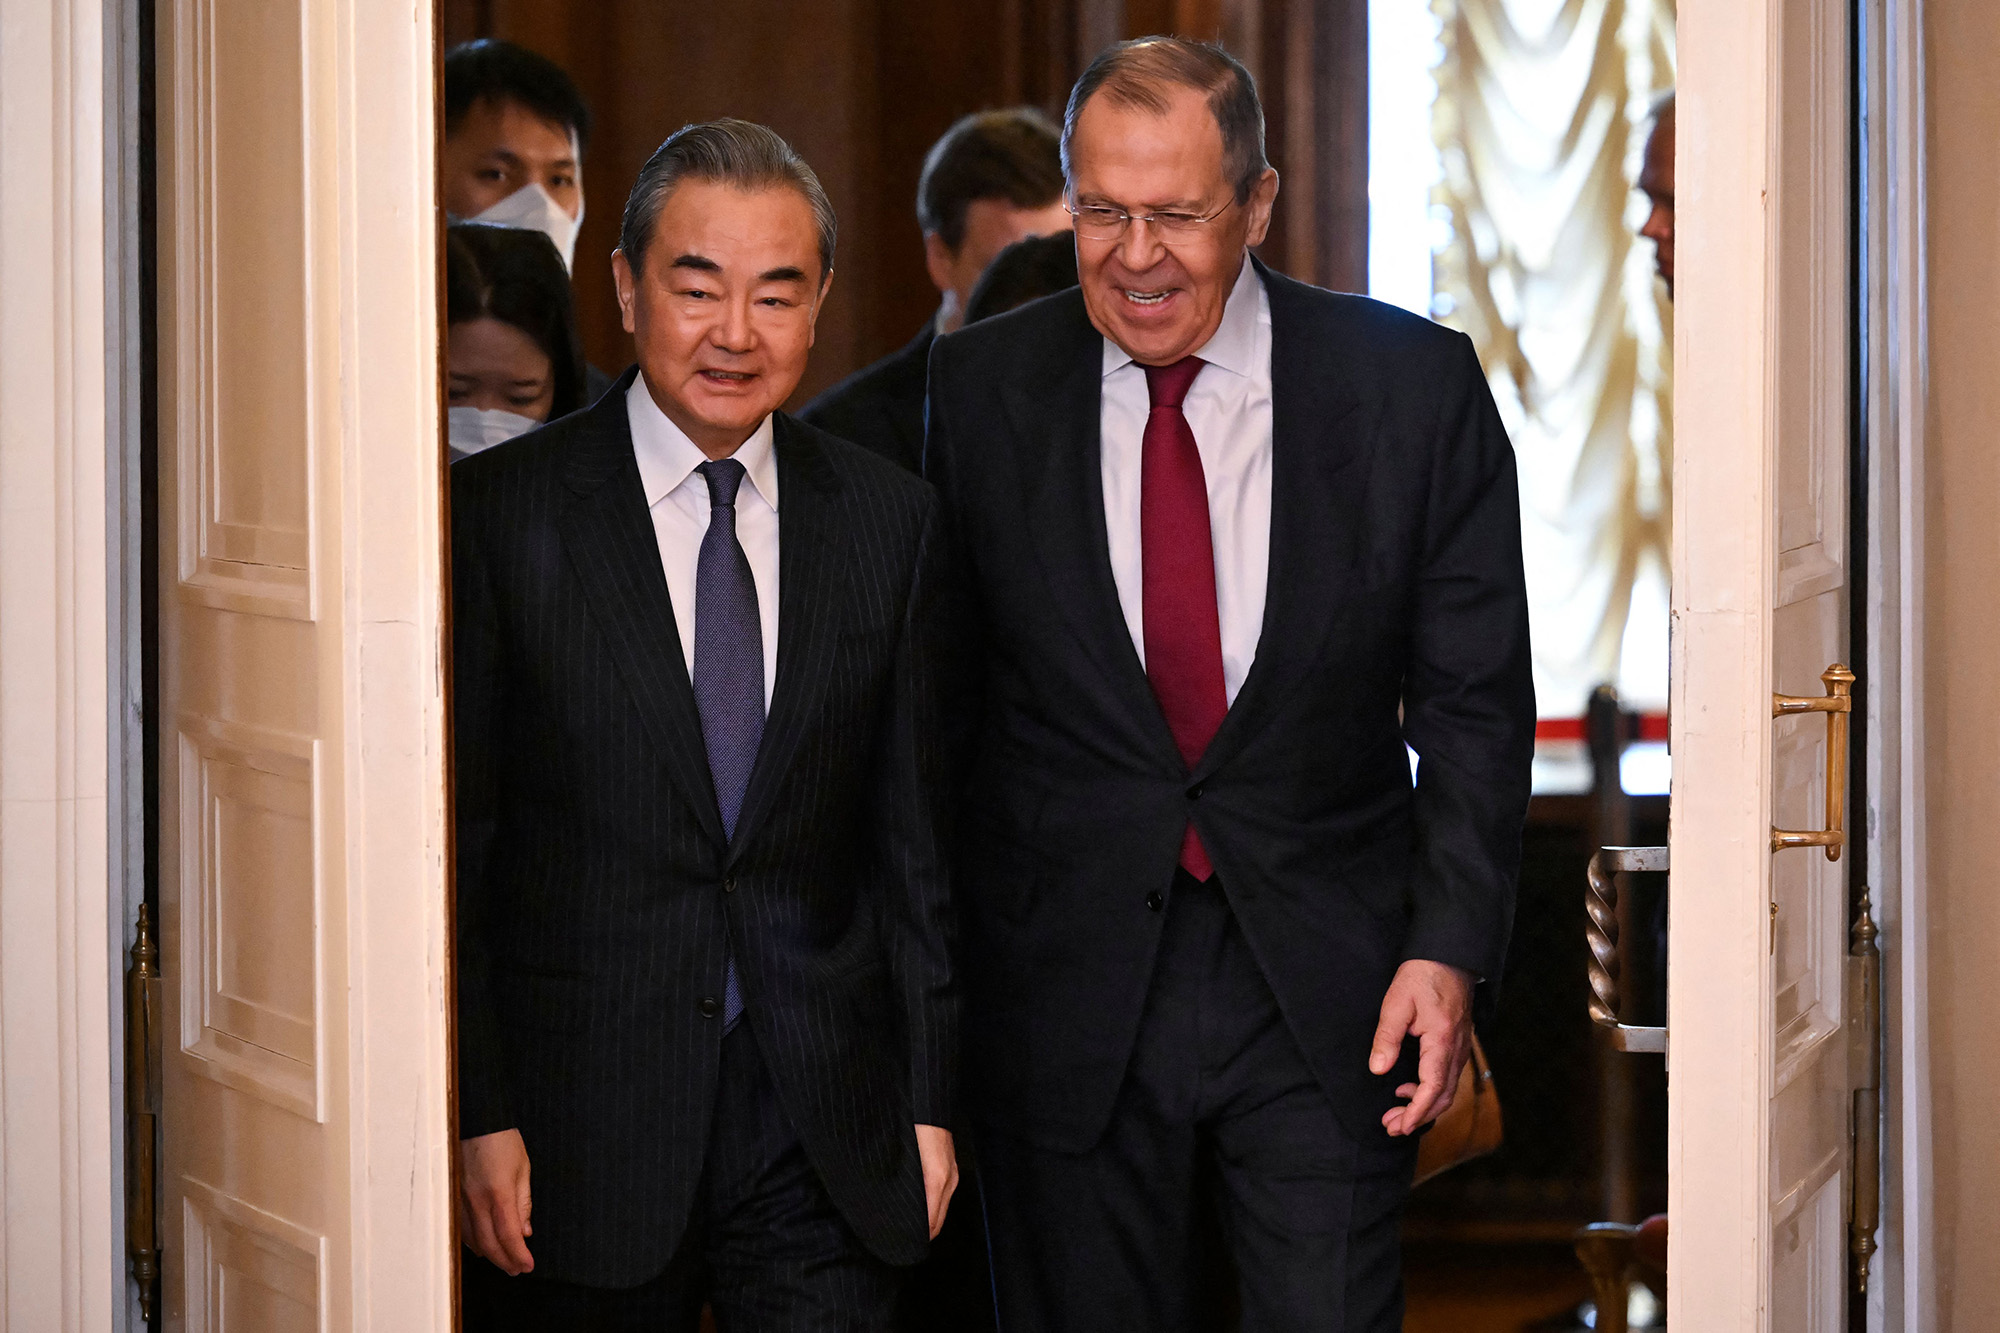 Russian Foreign Minister Sergei Lavrov, right, and China's Director of the Office of the Central Foreign Affairs Commission Wang Yi during a meeting in Moscow, Russia, on February 22.